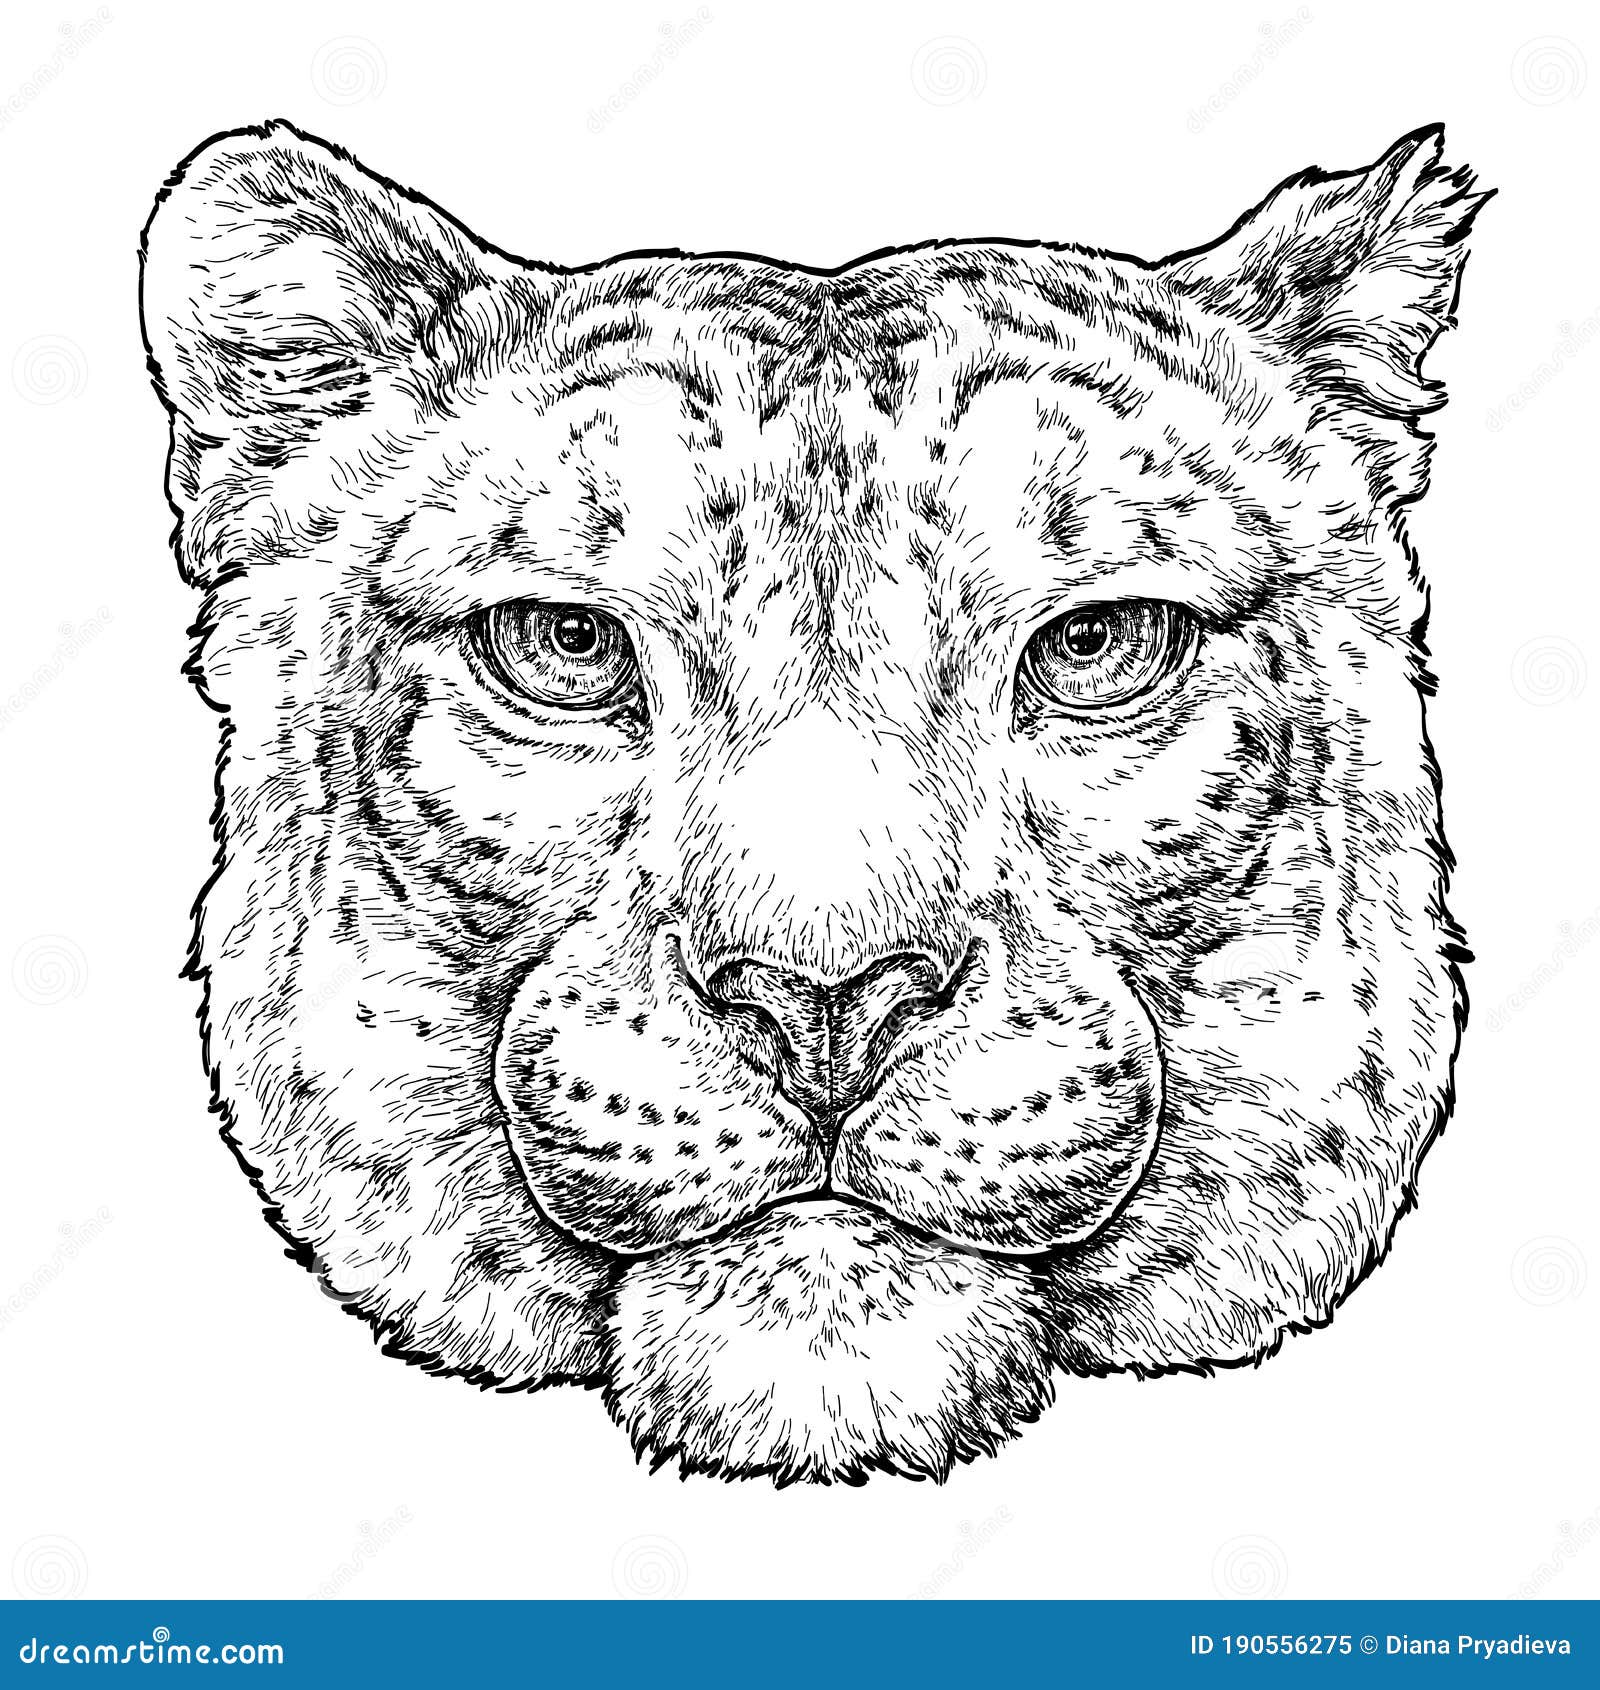 Hand Drawn Portrait Of Snow Leopard. Vector Illustration Isolated On